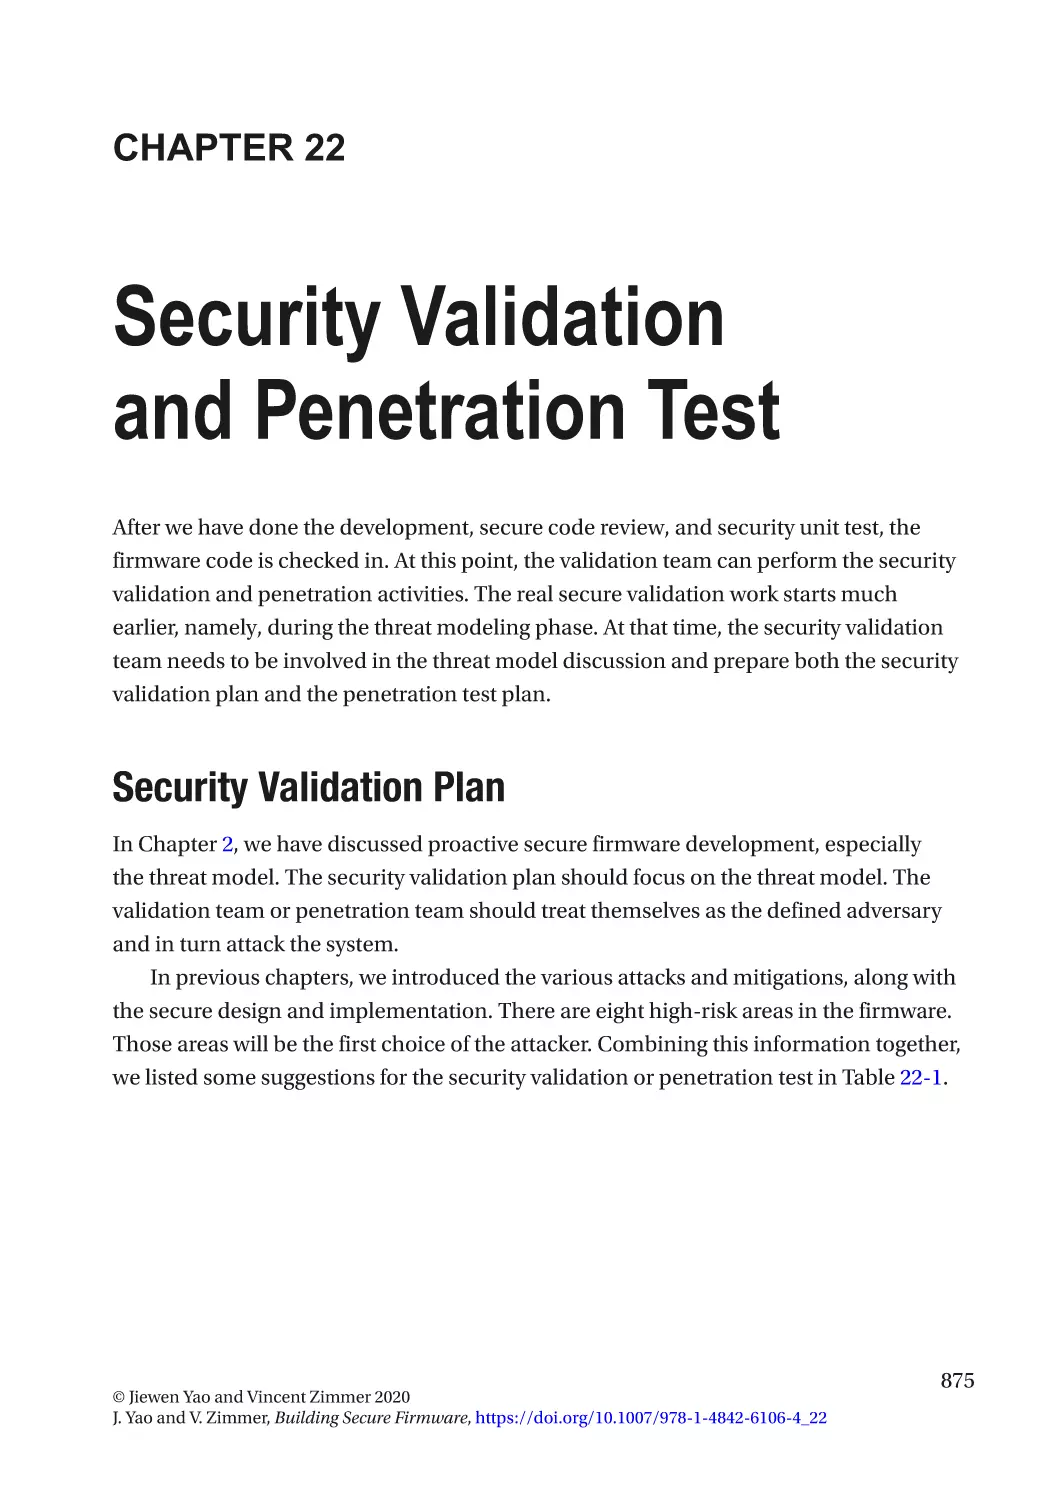 Chapter 22
Security Validation Plan